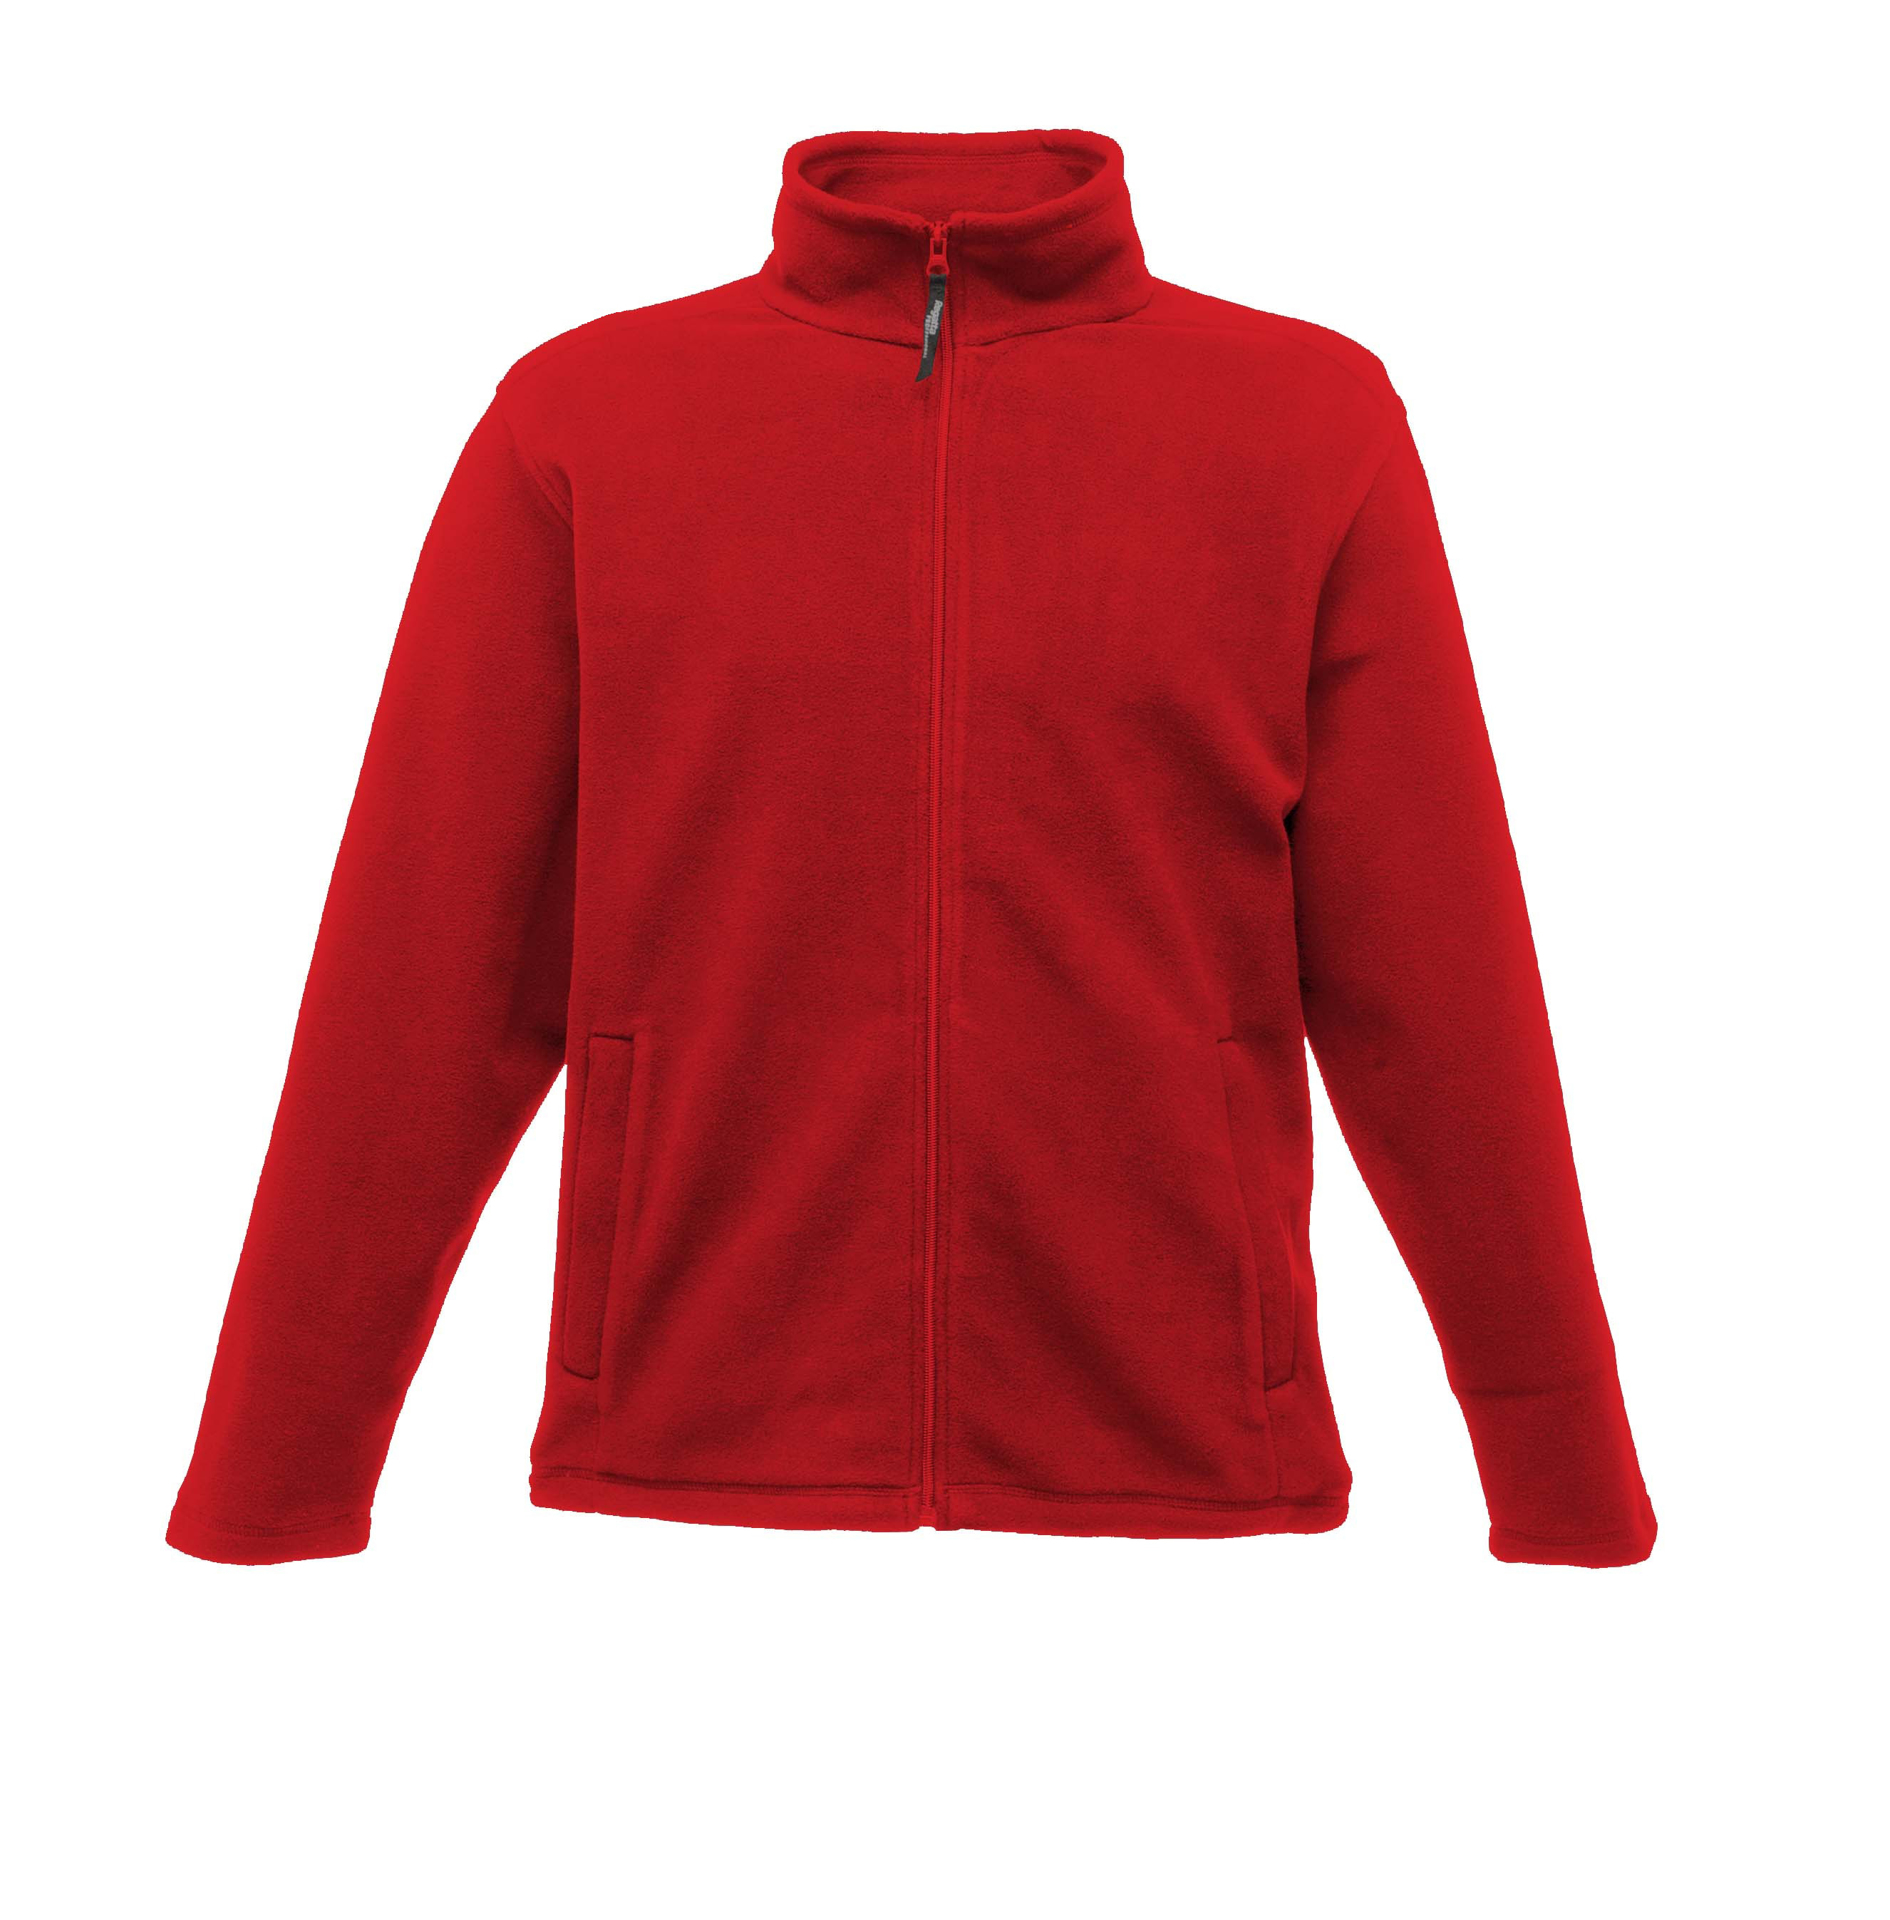 Full Zip Microfleece in red with 2 zipped lower pockets